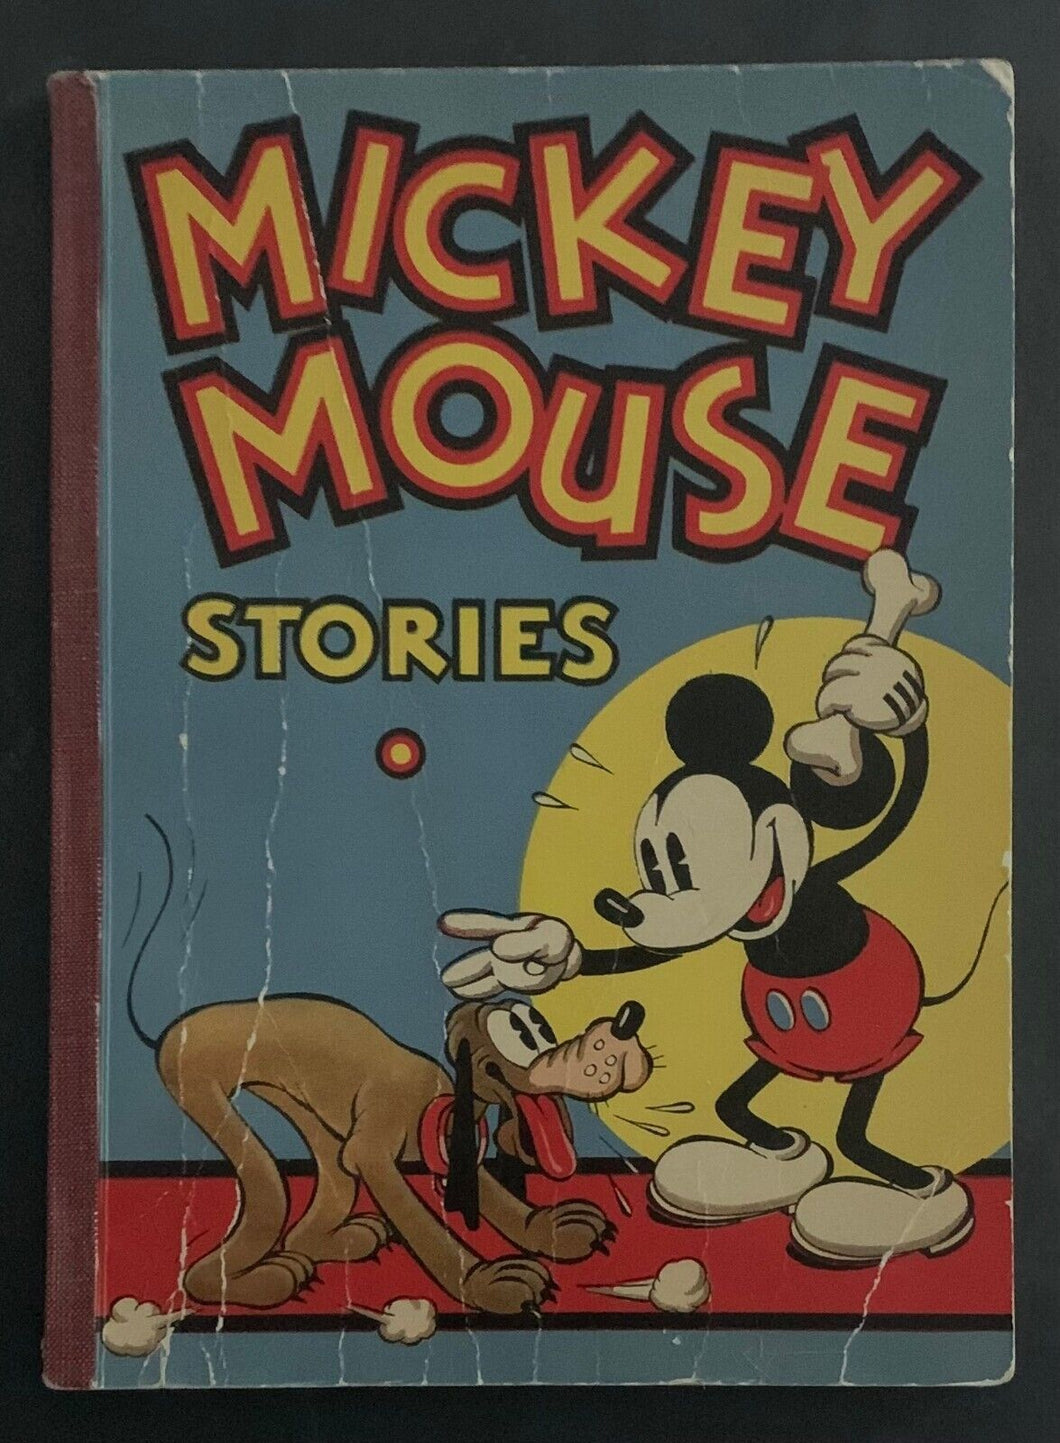 1934 Mickey Mouse Stories Book Musson Book Company Vintage Original Toronto